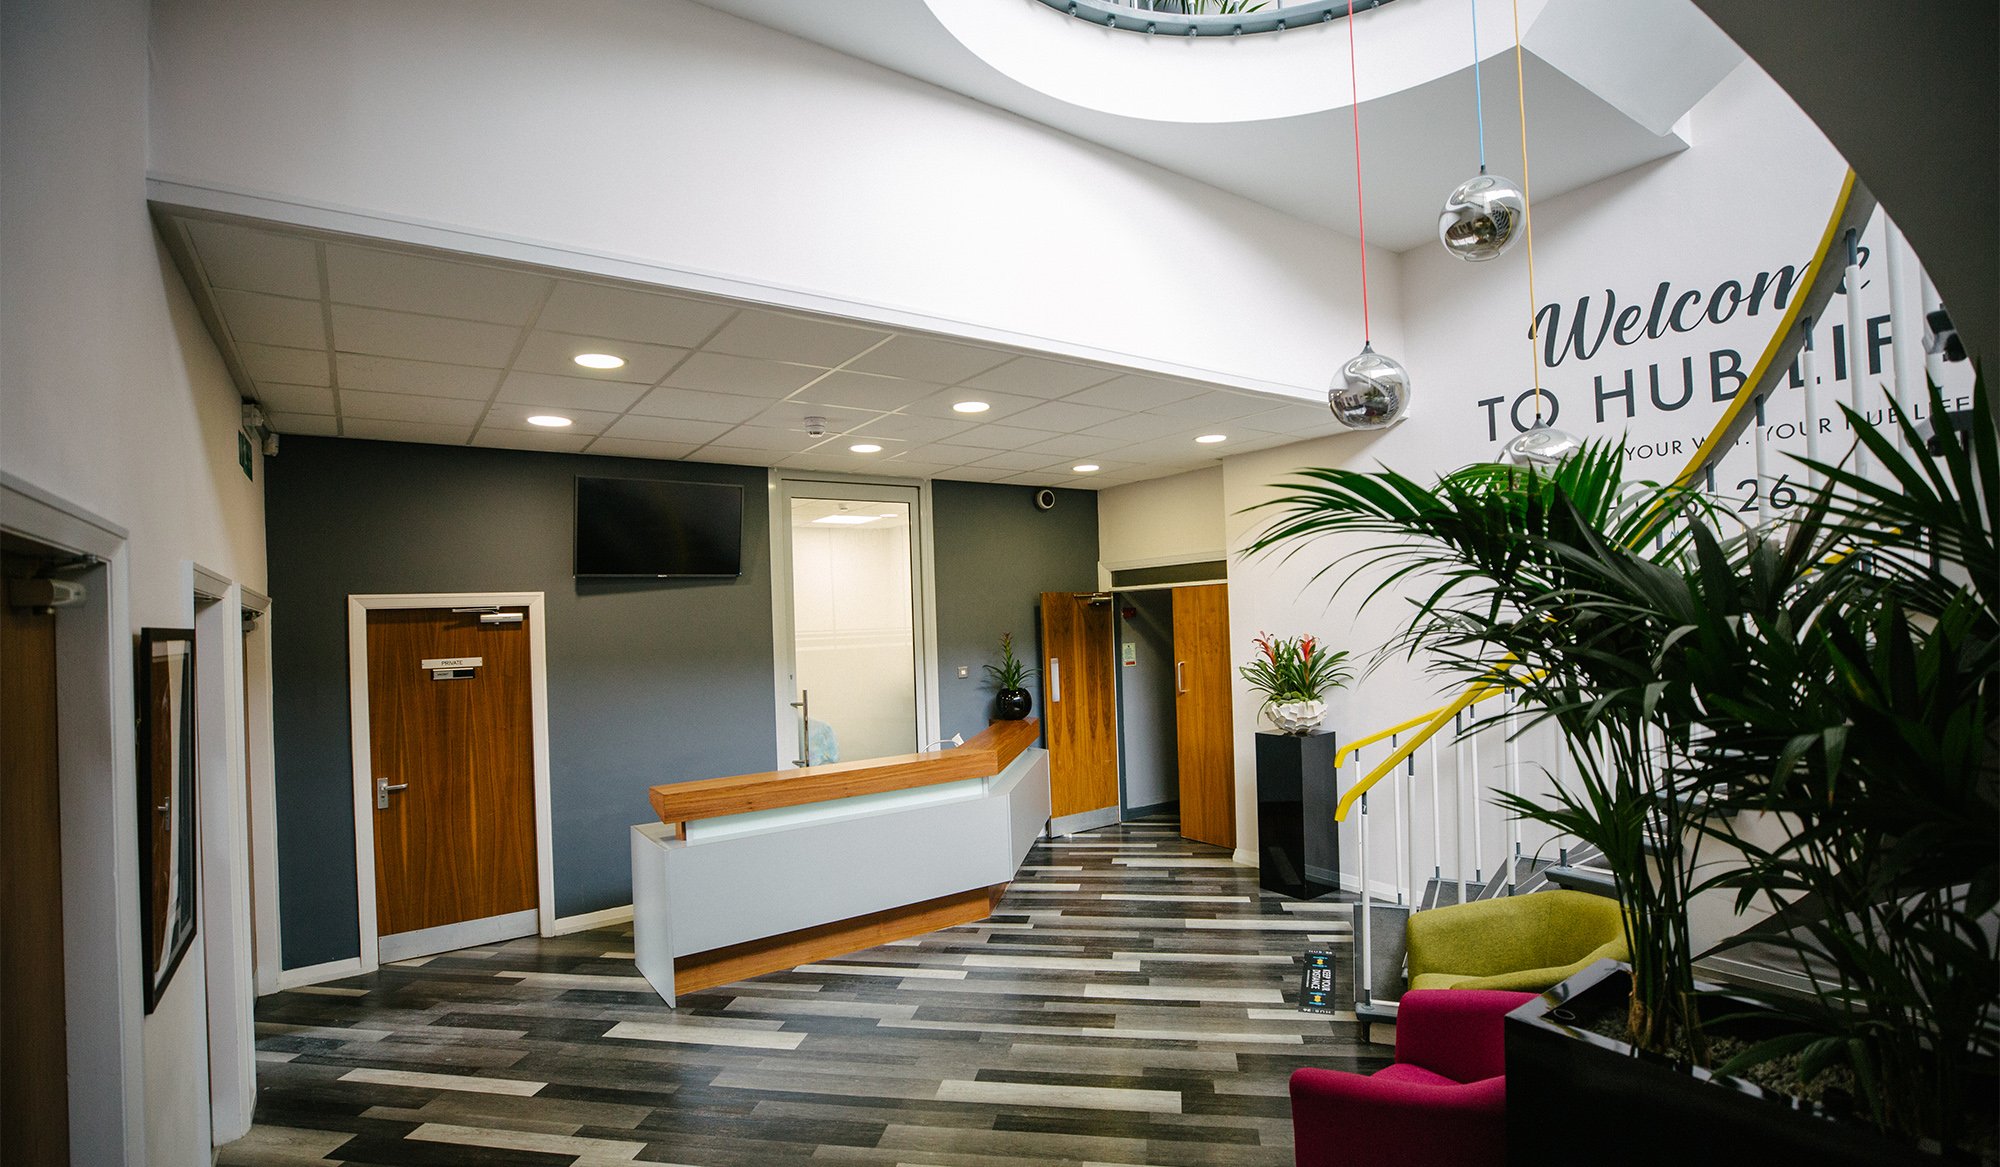 HUB26 Office Space Yorkshire